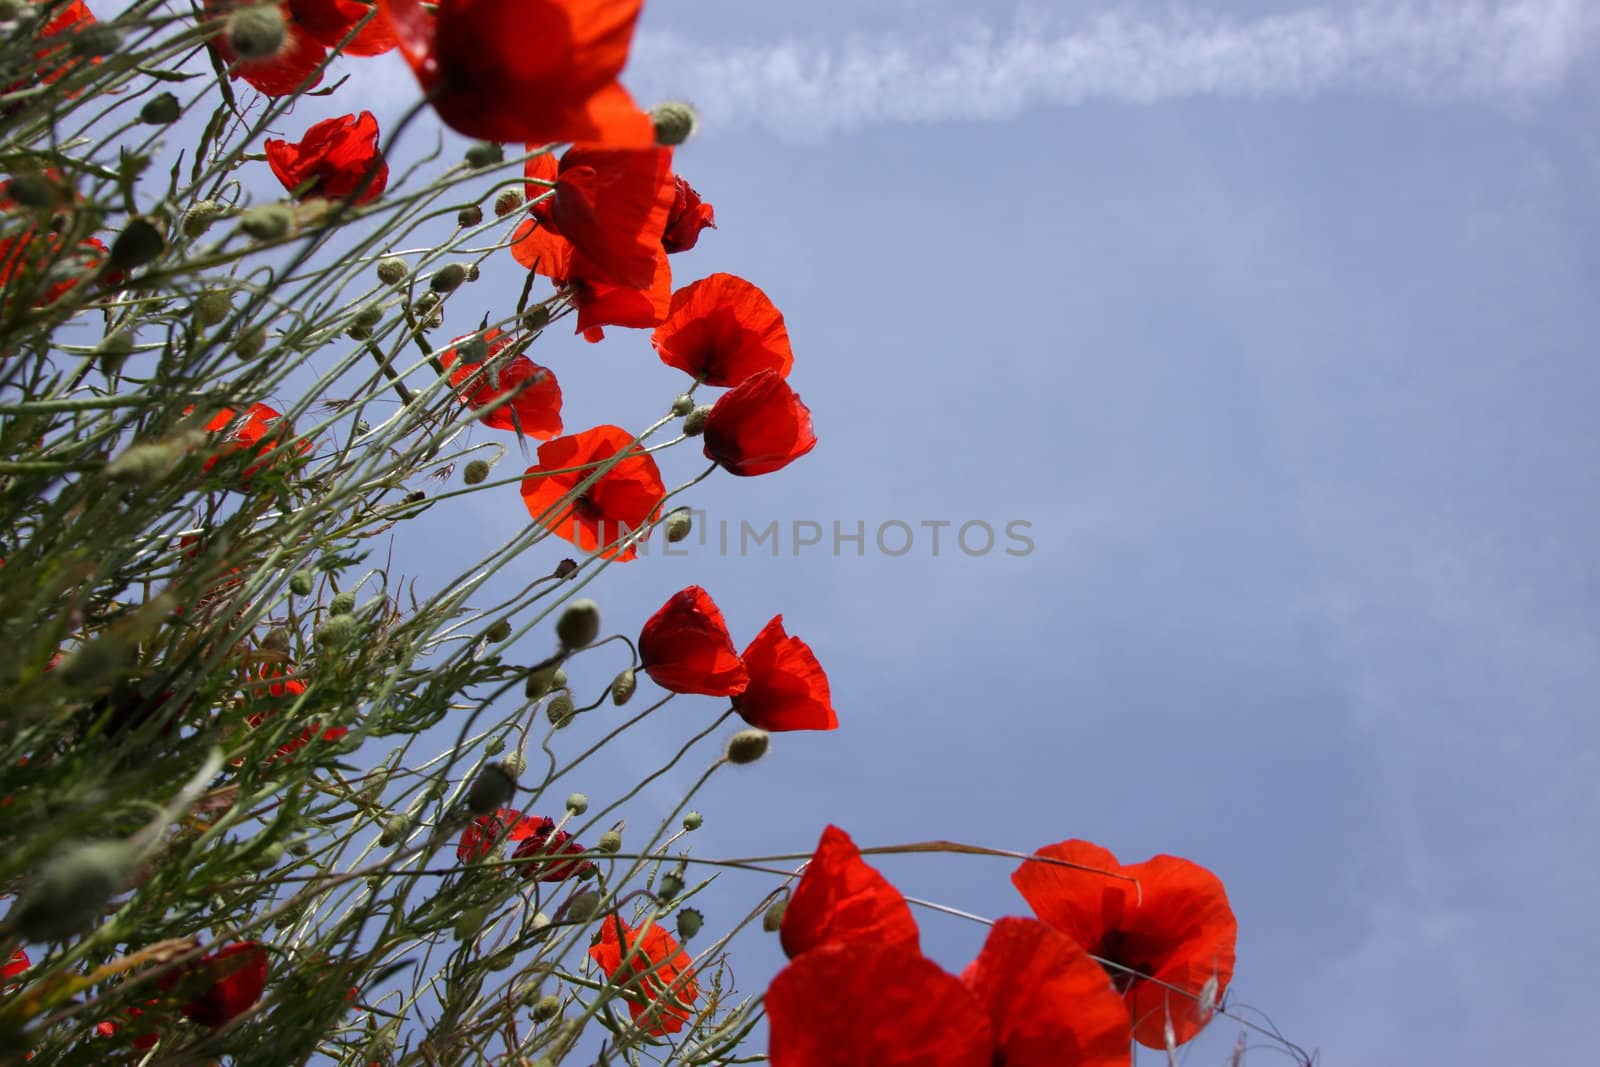 Poppies in perspective against a background of blue sky
